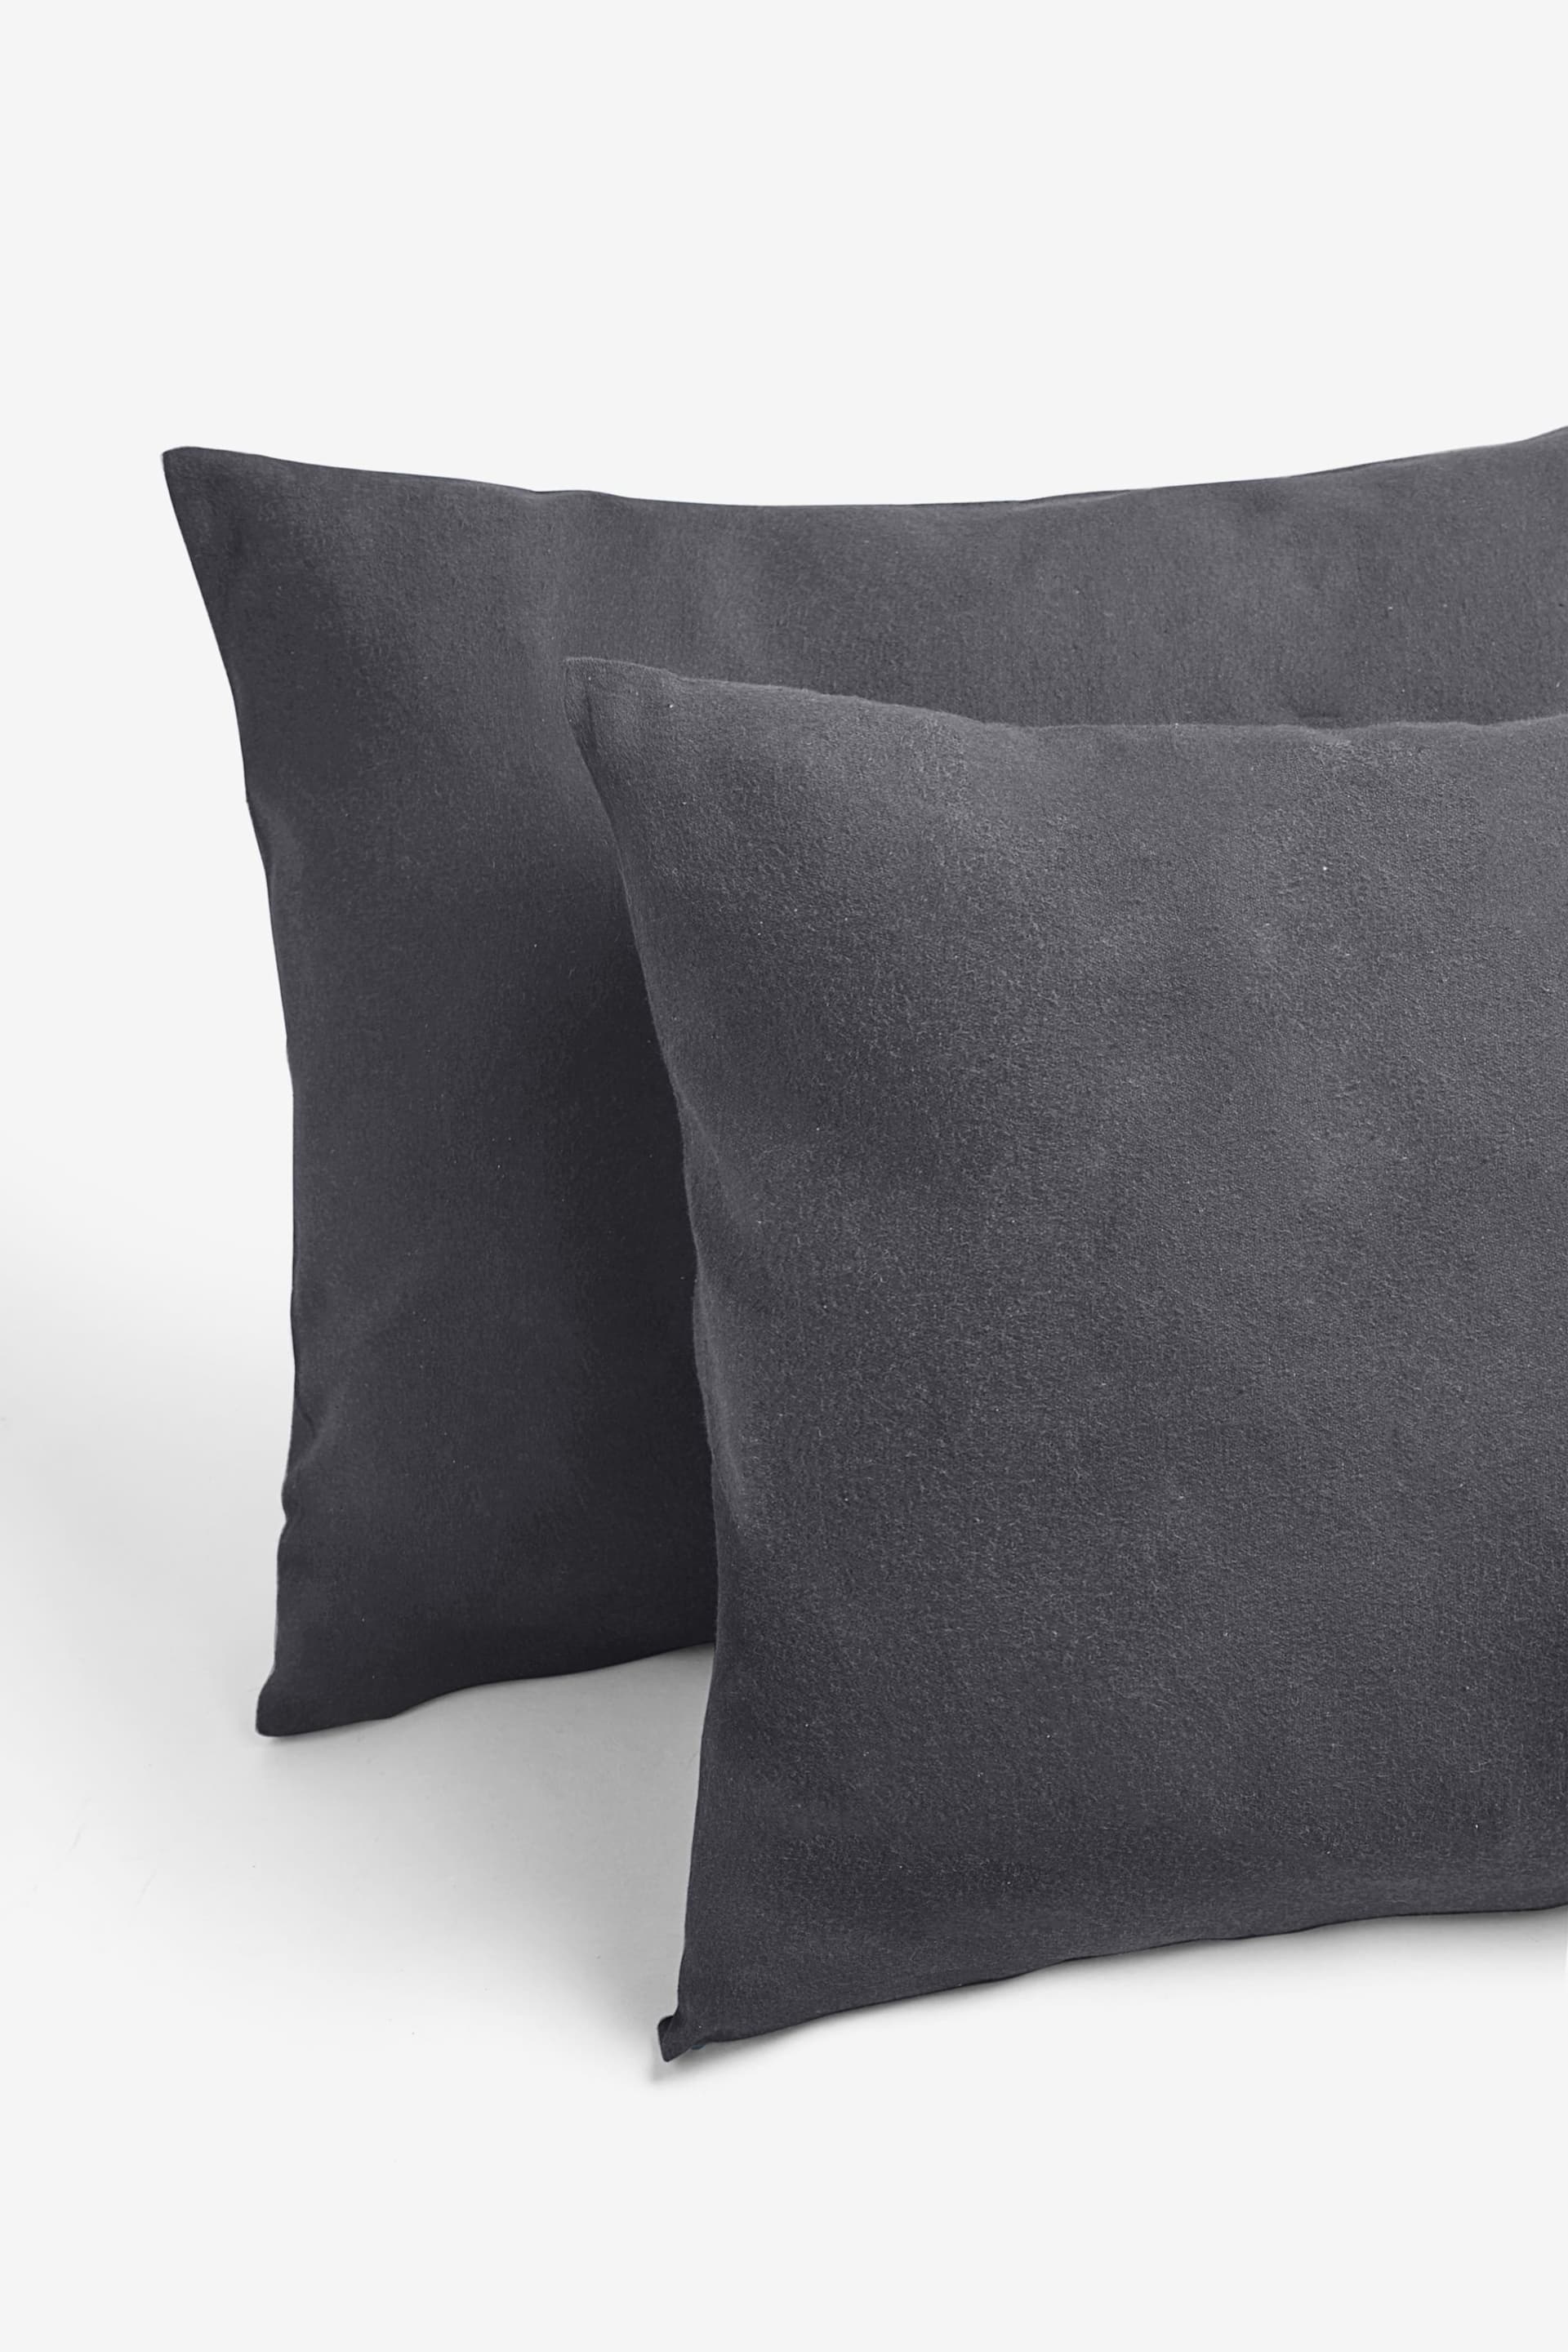 Charcoal Grey 100% Cotton Supersoft Brushed Plain Duvet Cover And Pillowcase Set - Image 6 of 6